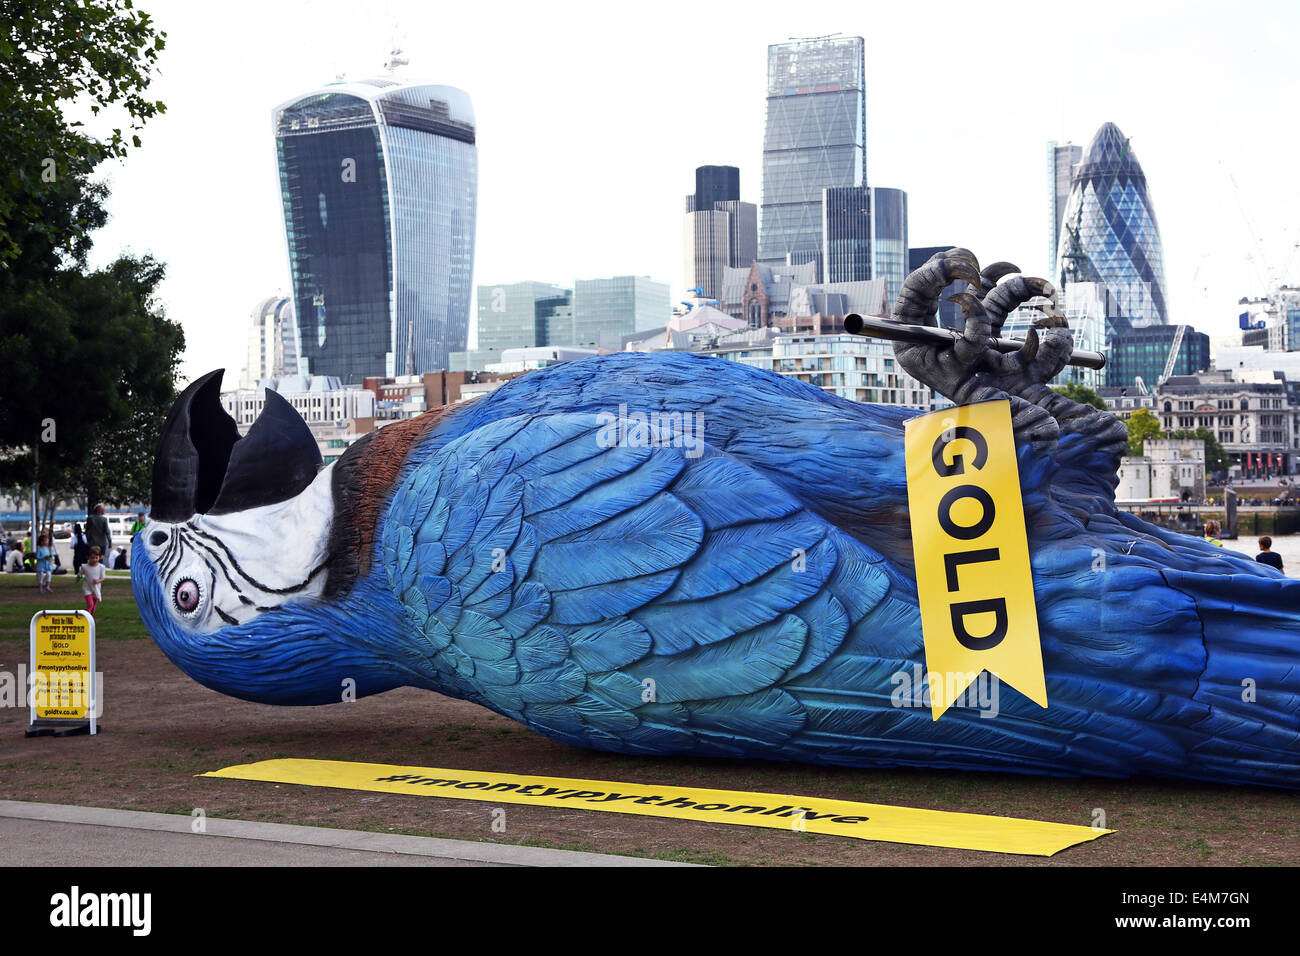 London, UK. 14th July 2014. A giant fibre-glass Dead Parrot almost 50 feet long has been laid on its back at Potter's Field near London Bridge, London to promote Monty Python live on the TV channel Gold. It is a replica of the mythical Norwegian Blue which is the subject of one of the most famous Monty Python sketches. Credit:  Paul Brown/Alamy Live News Stock Photo